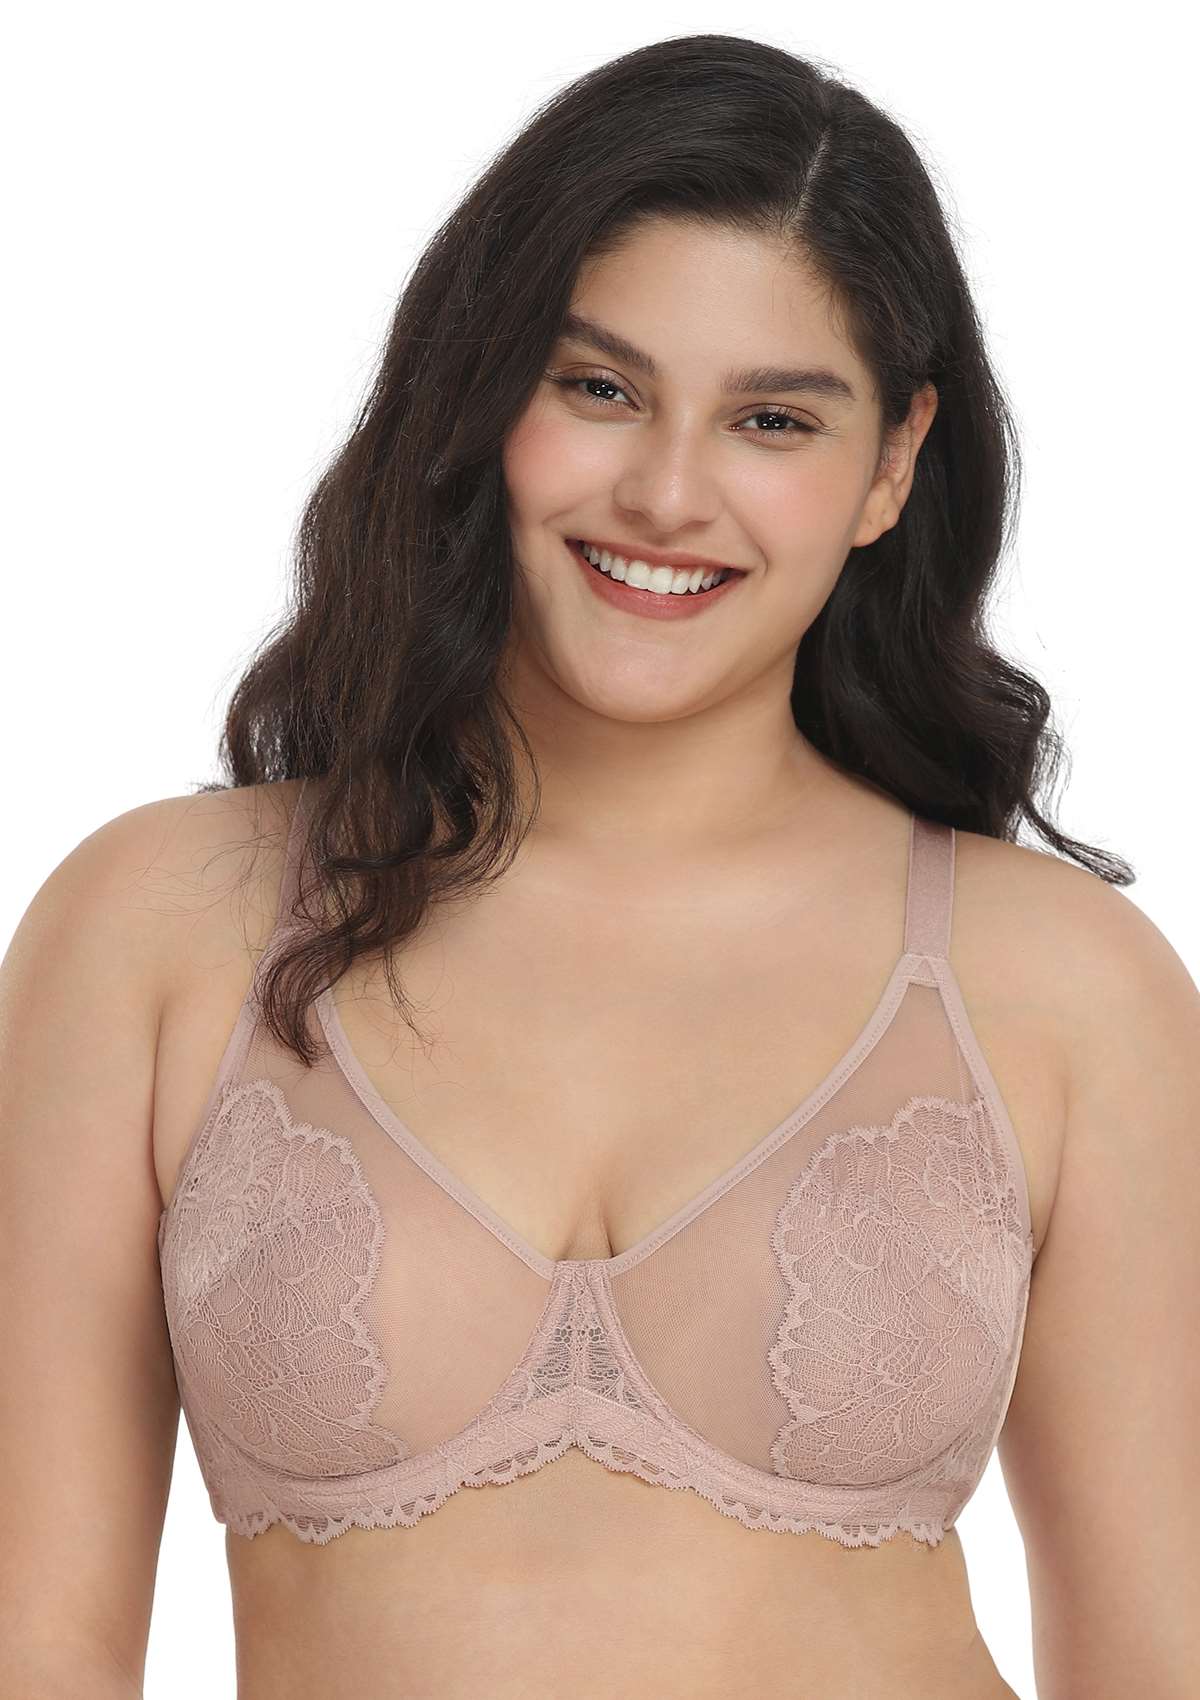 HSIA Blossom Lace Bra And Panties Set: Best Bra For Large Busts - Dark Pink / 34 / C